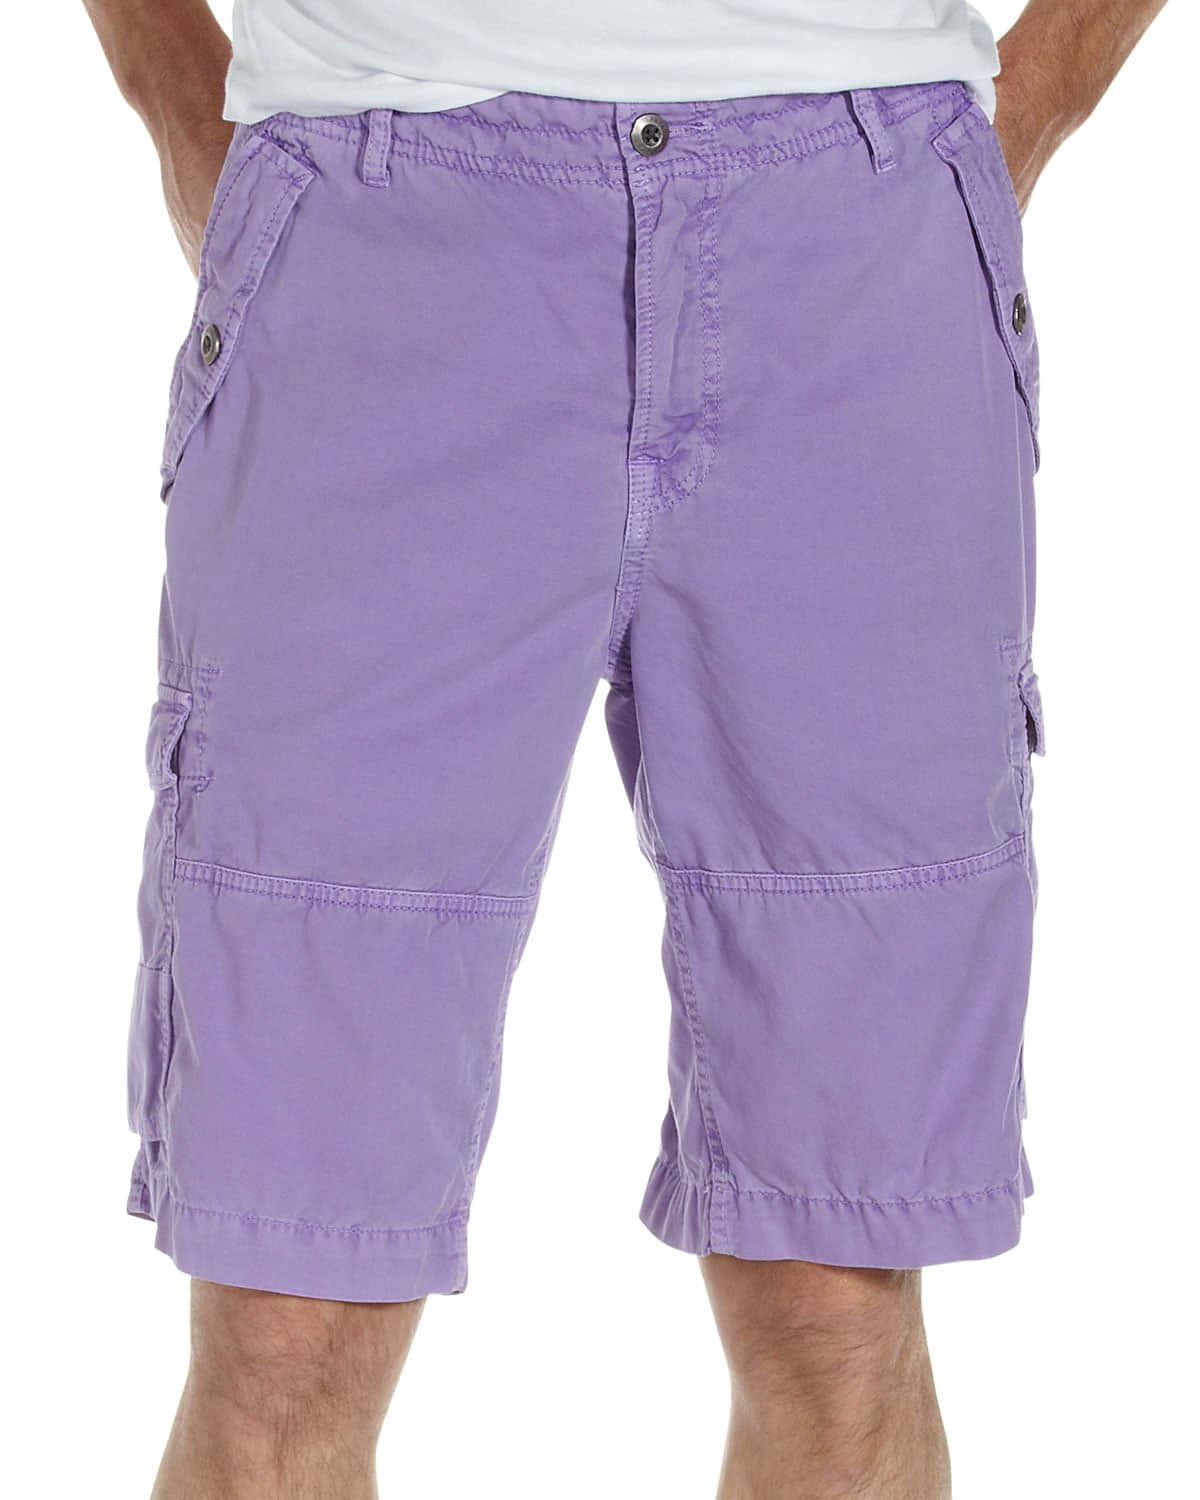 Download A pair of Purple Shorts Wallpaper | Wallpapers.com